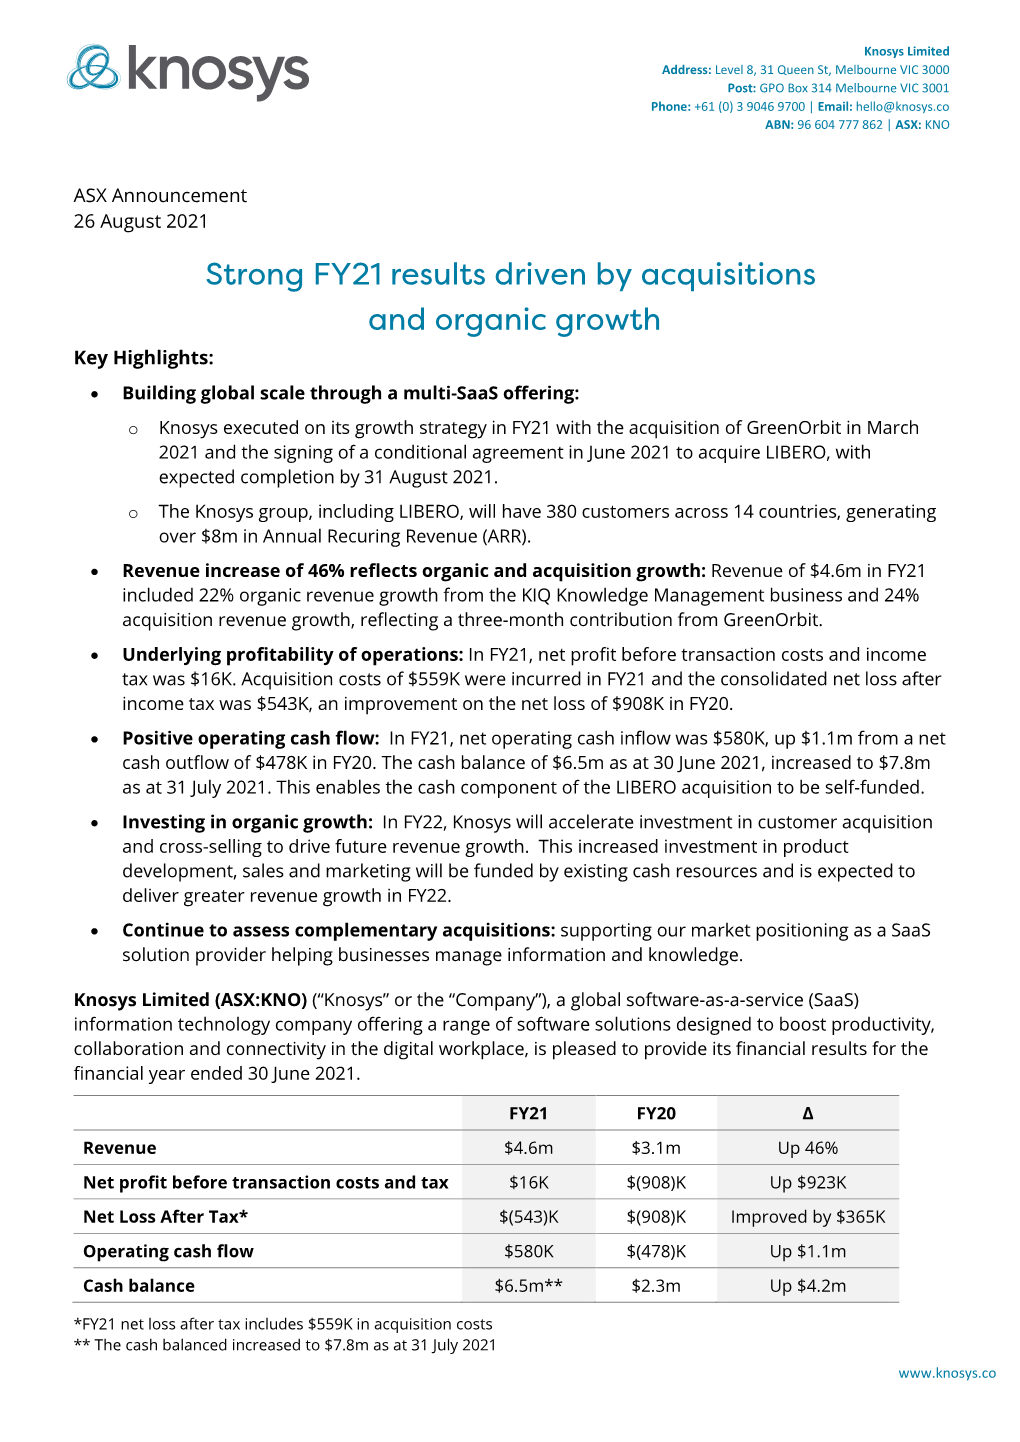 Strong FY21 Results Driven by Acquisitions and Organic Growth Key Highlights: • Building Global Scale Through a Multi-Saas Offering